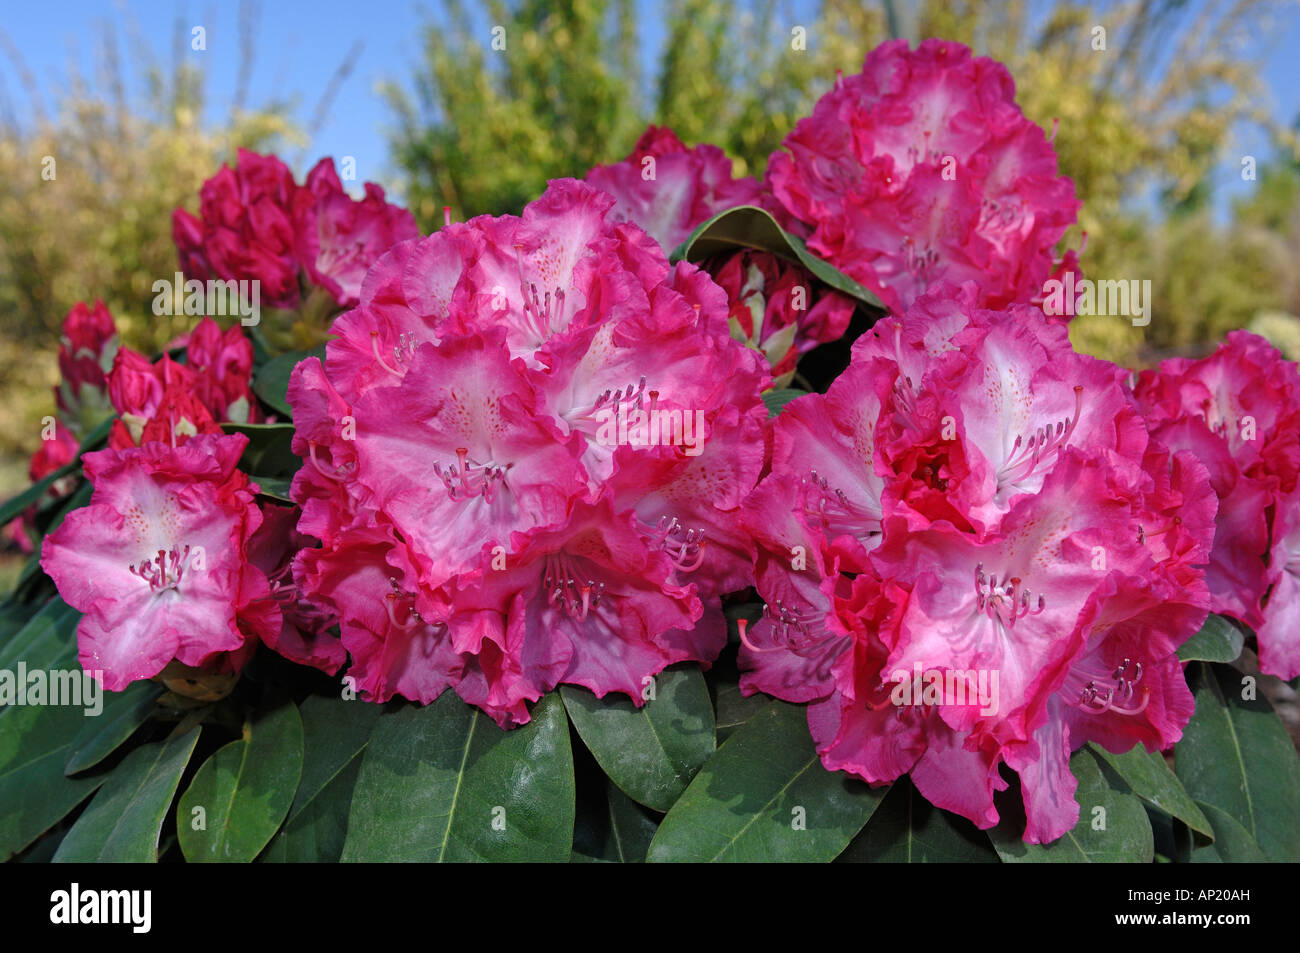 Rhododendron (Rhododendron hybrid), variety: Germania, flowers Stock Photo